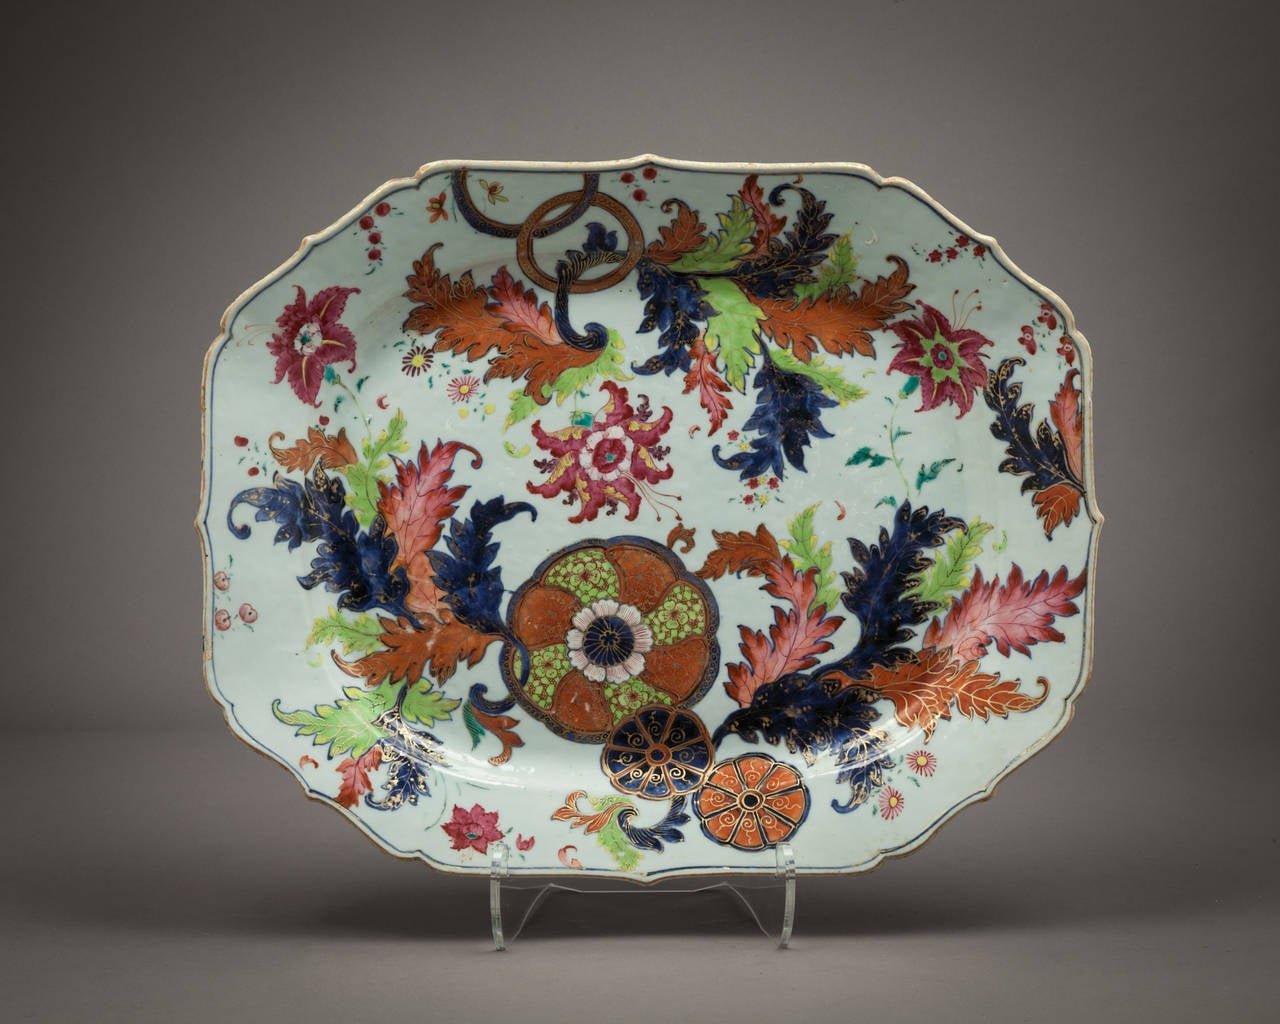 Chinese Export pseudo-tobacco-leaf pattern platter, circa 1770.